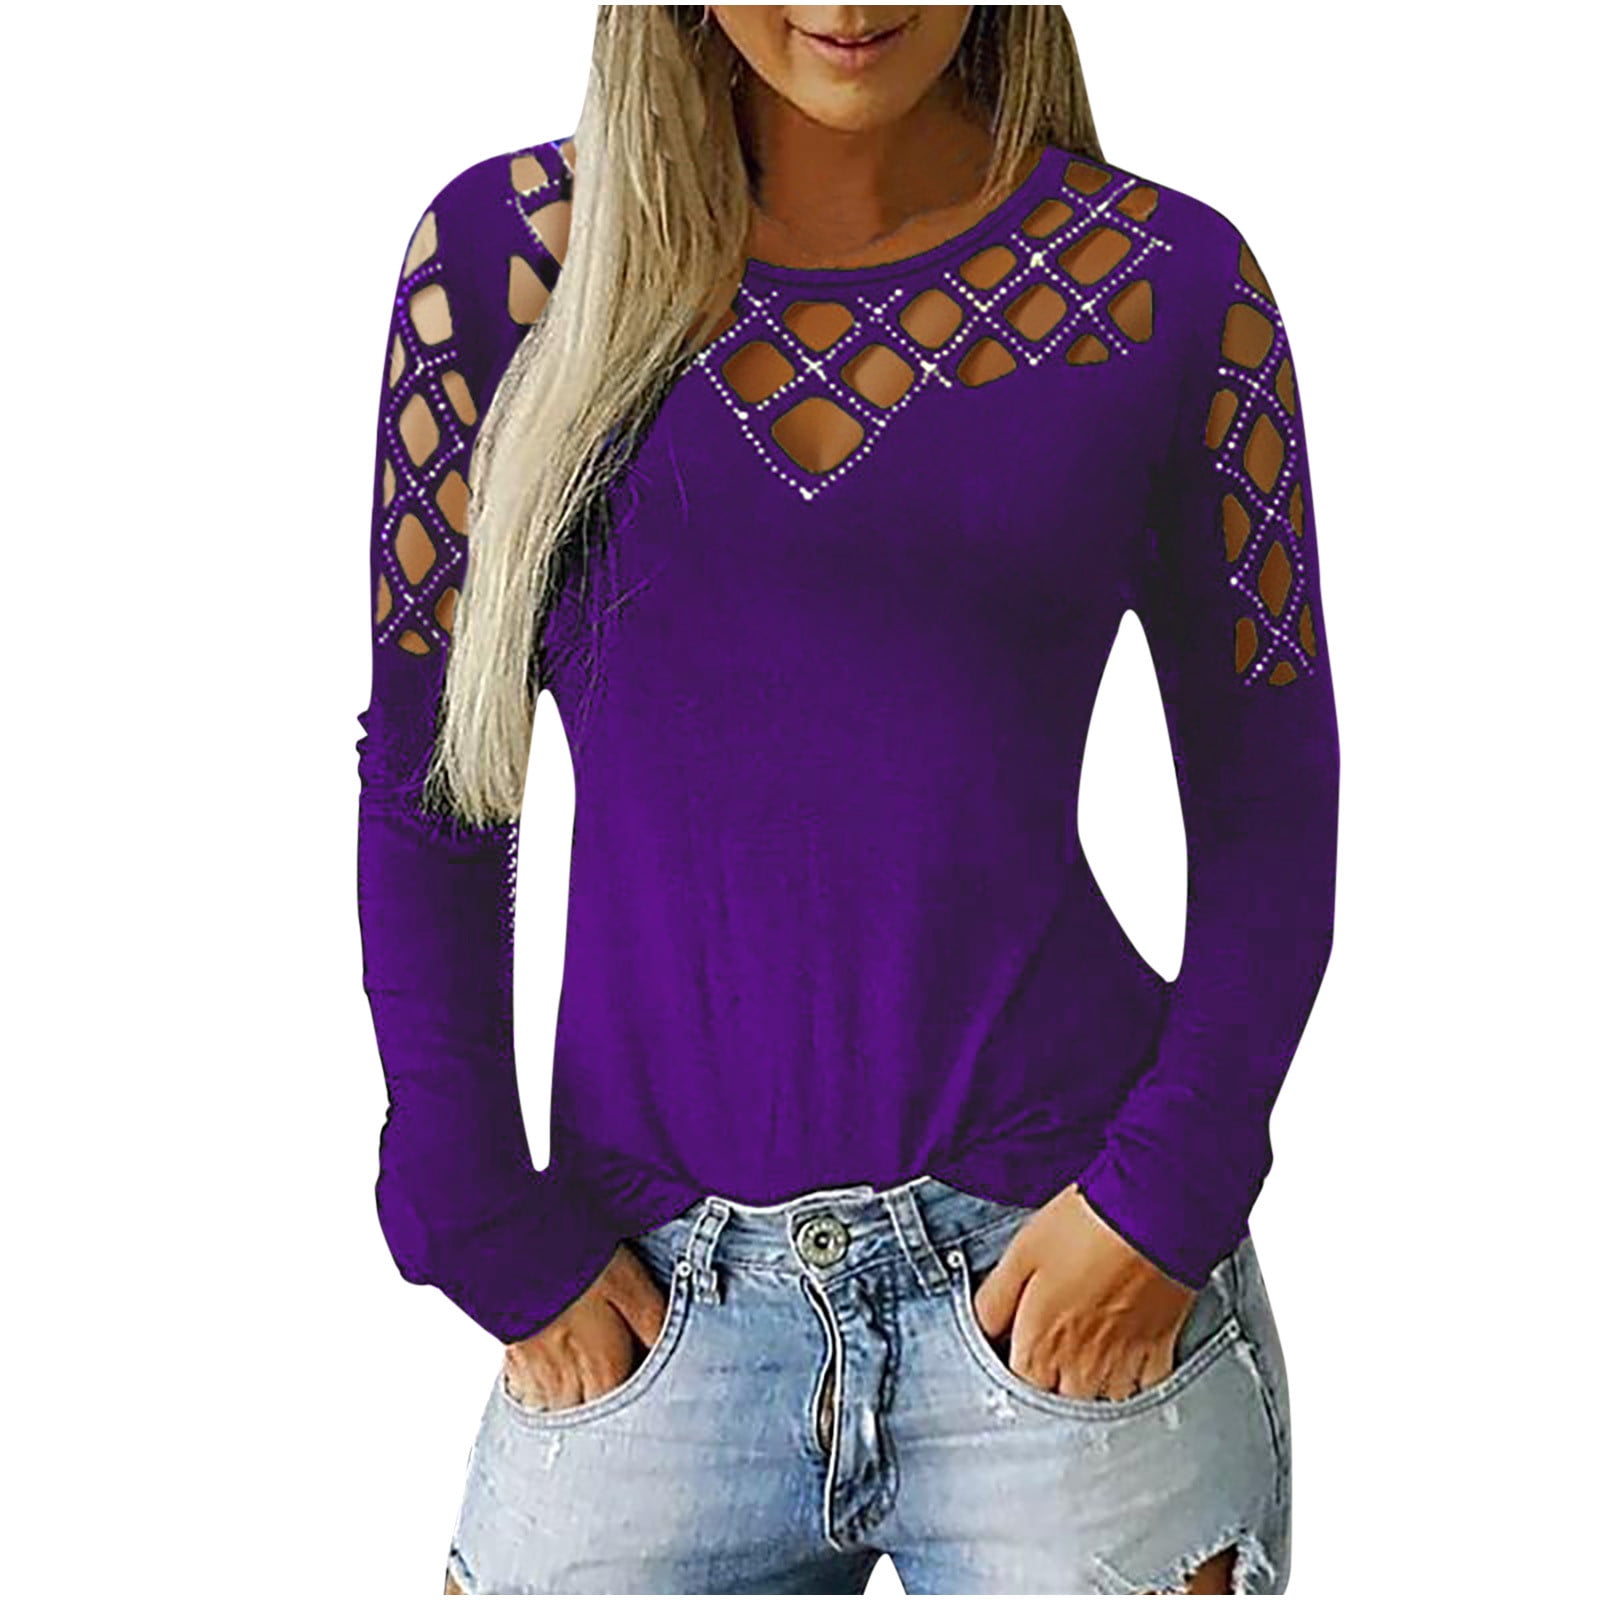 CEHVOM Plus Size Tops for Women Plus Size Womens Casual O-Neck Tops Long  Sleeve Cut Hollow Out Blouse T-Shirt